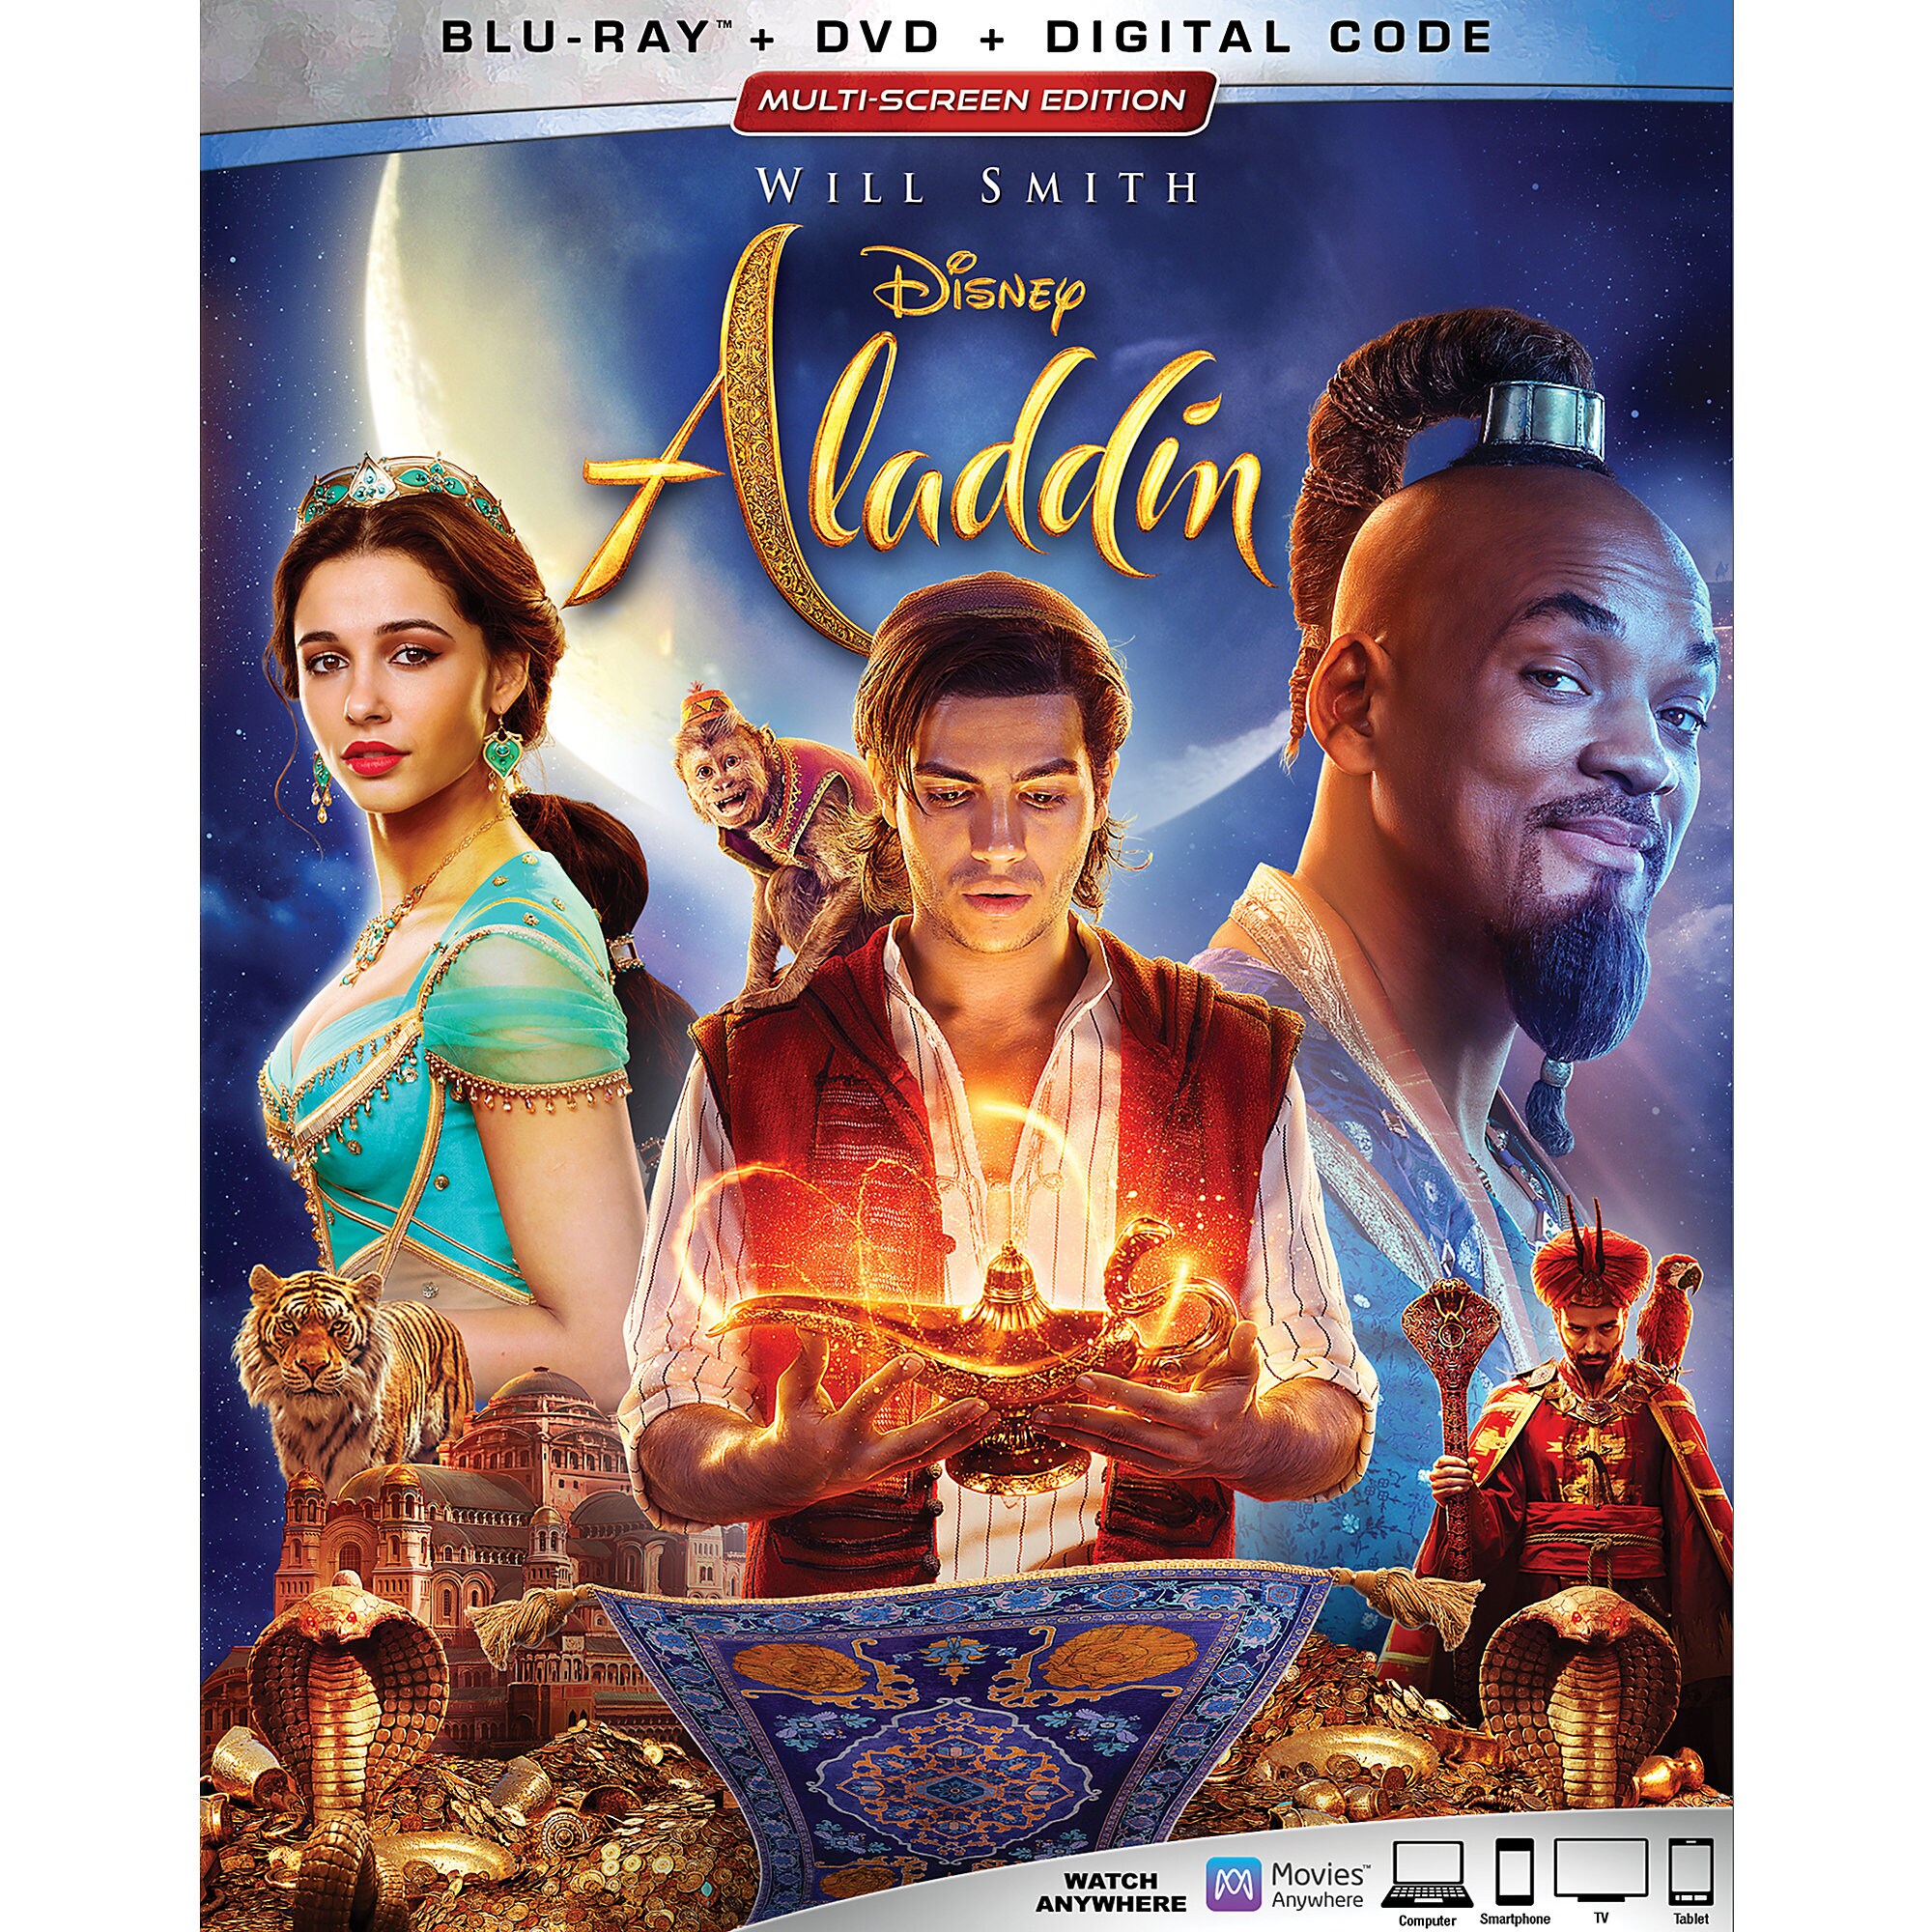 Aladdin Live Action Film Blu-ray Combo Pack Multi-Screen Edition with FREE Lithograph Set Offer - Pre-Order